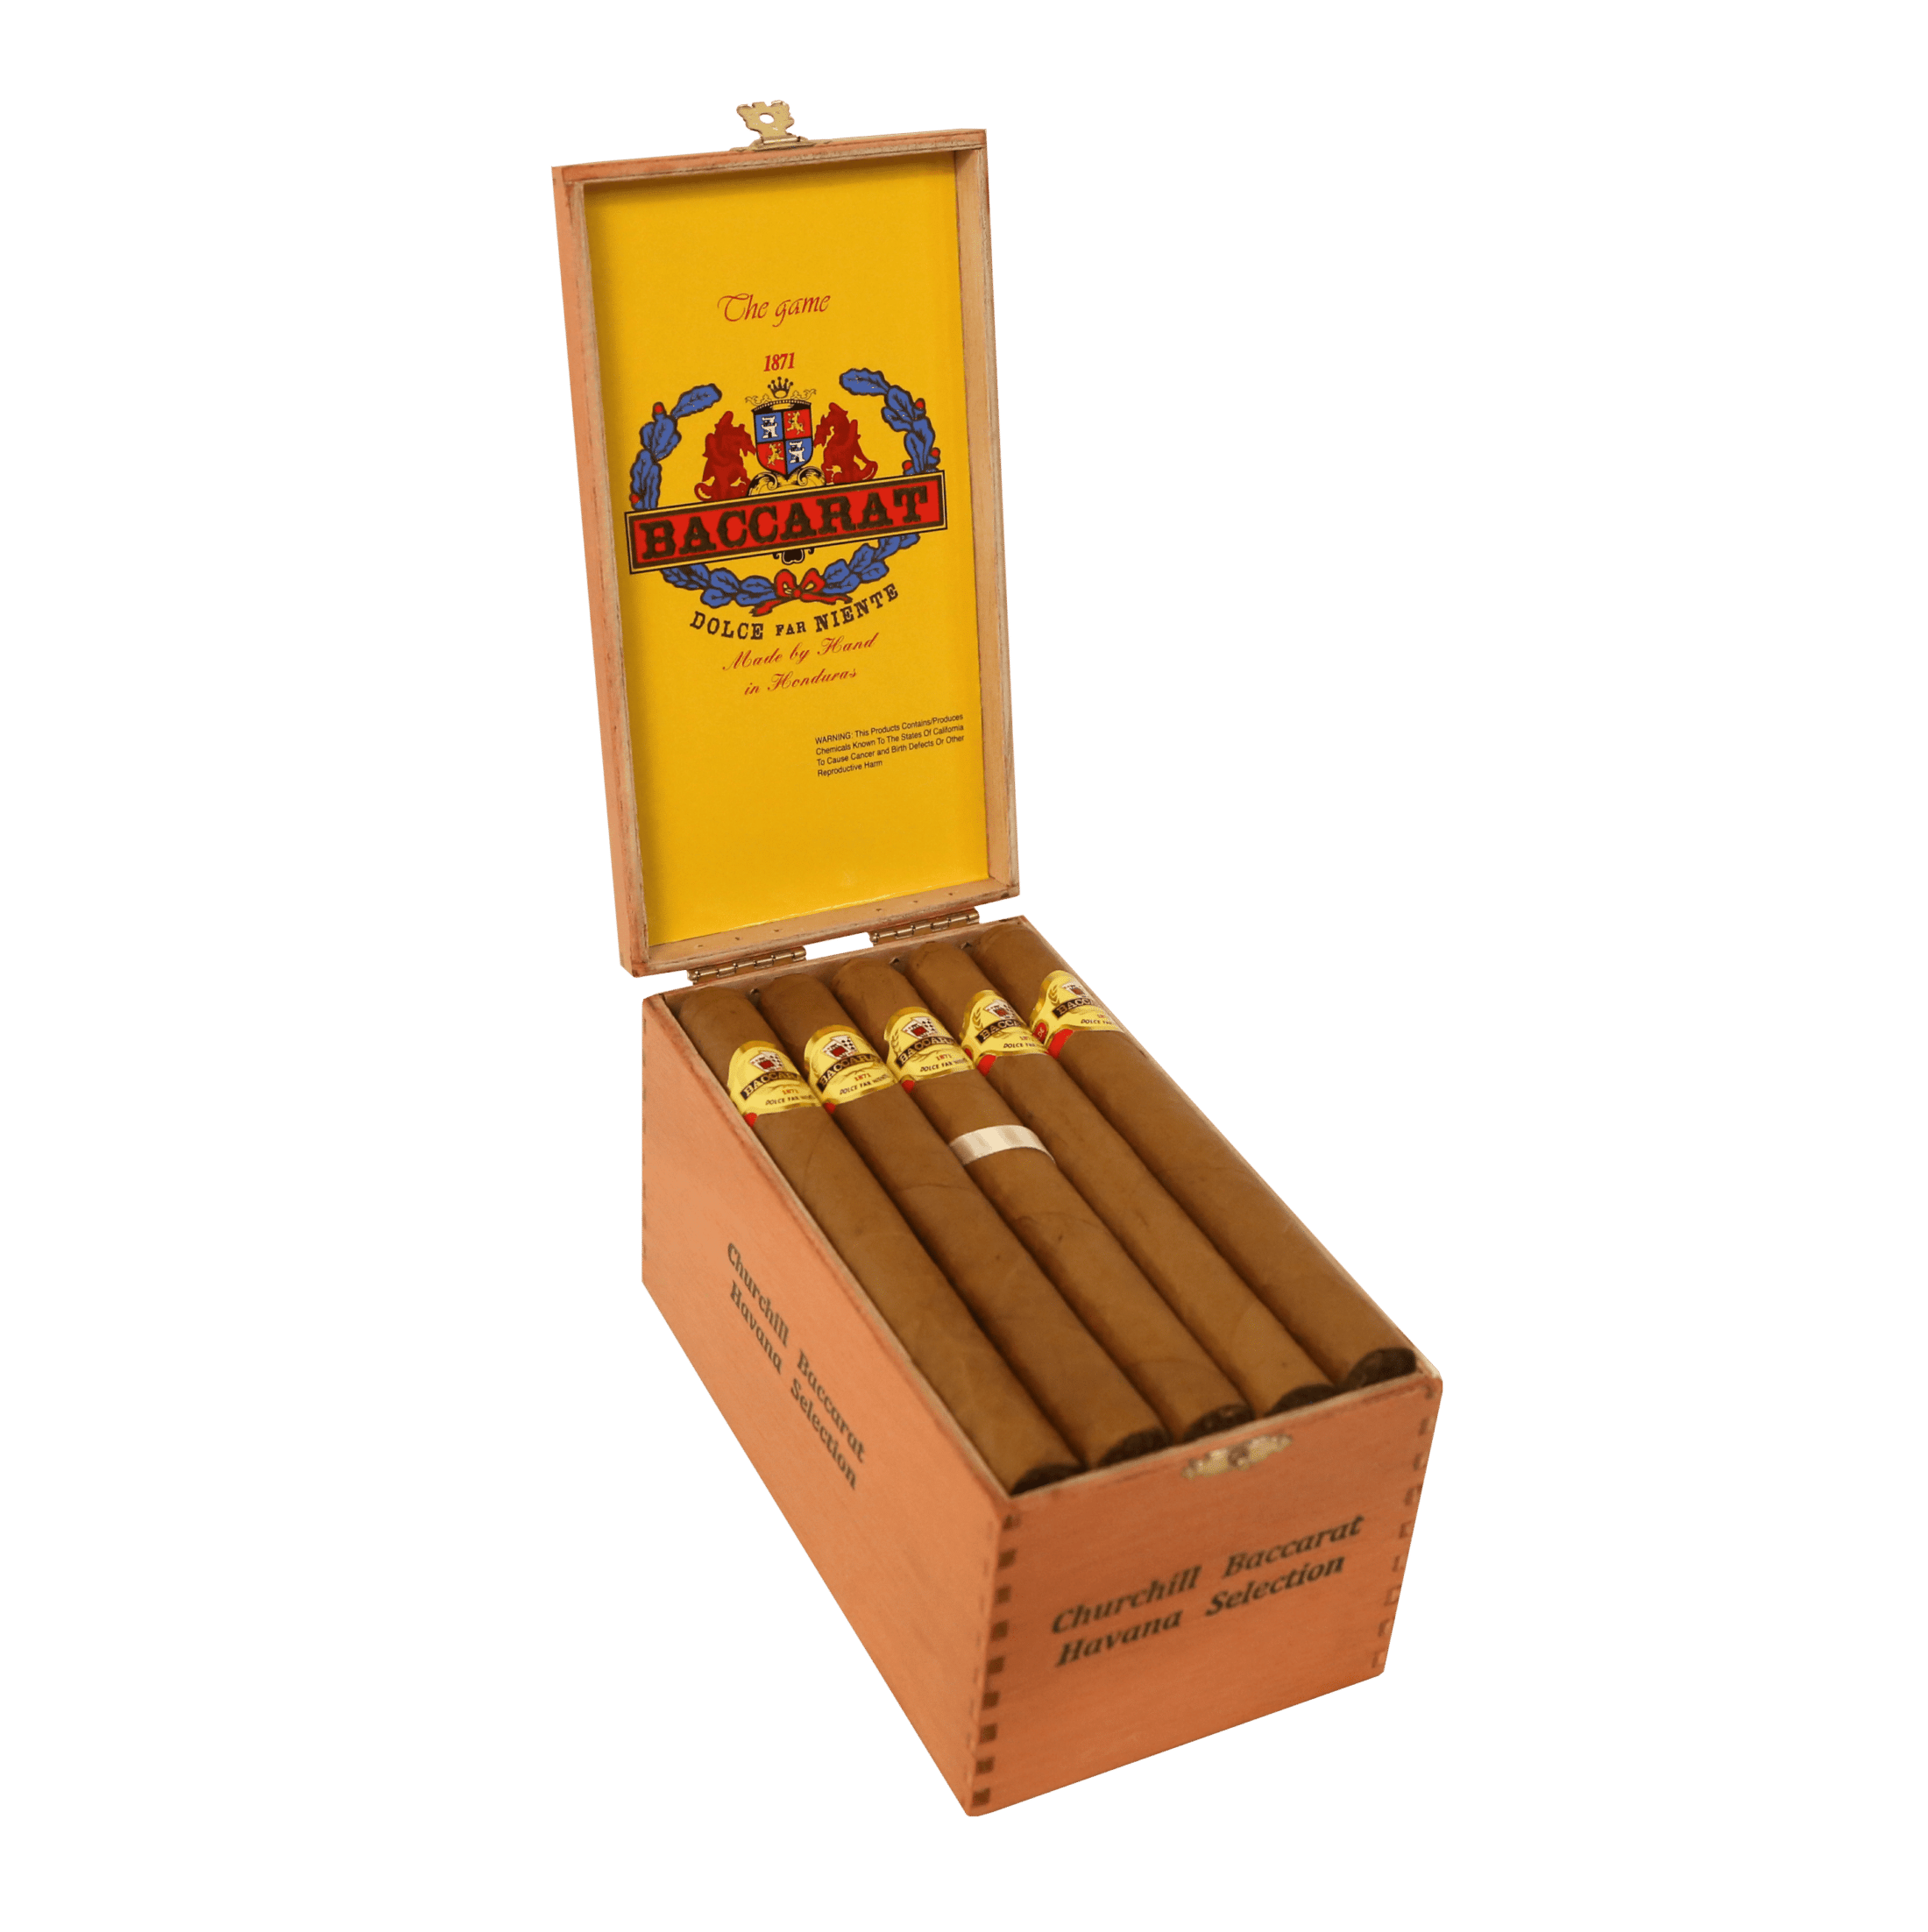 Open box of 25 count Baccarat Churchill Havana Selection cigars